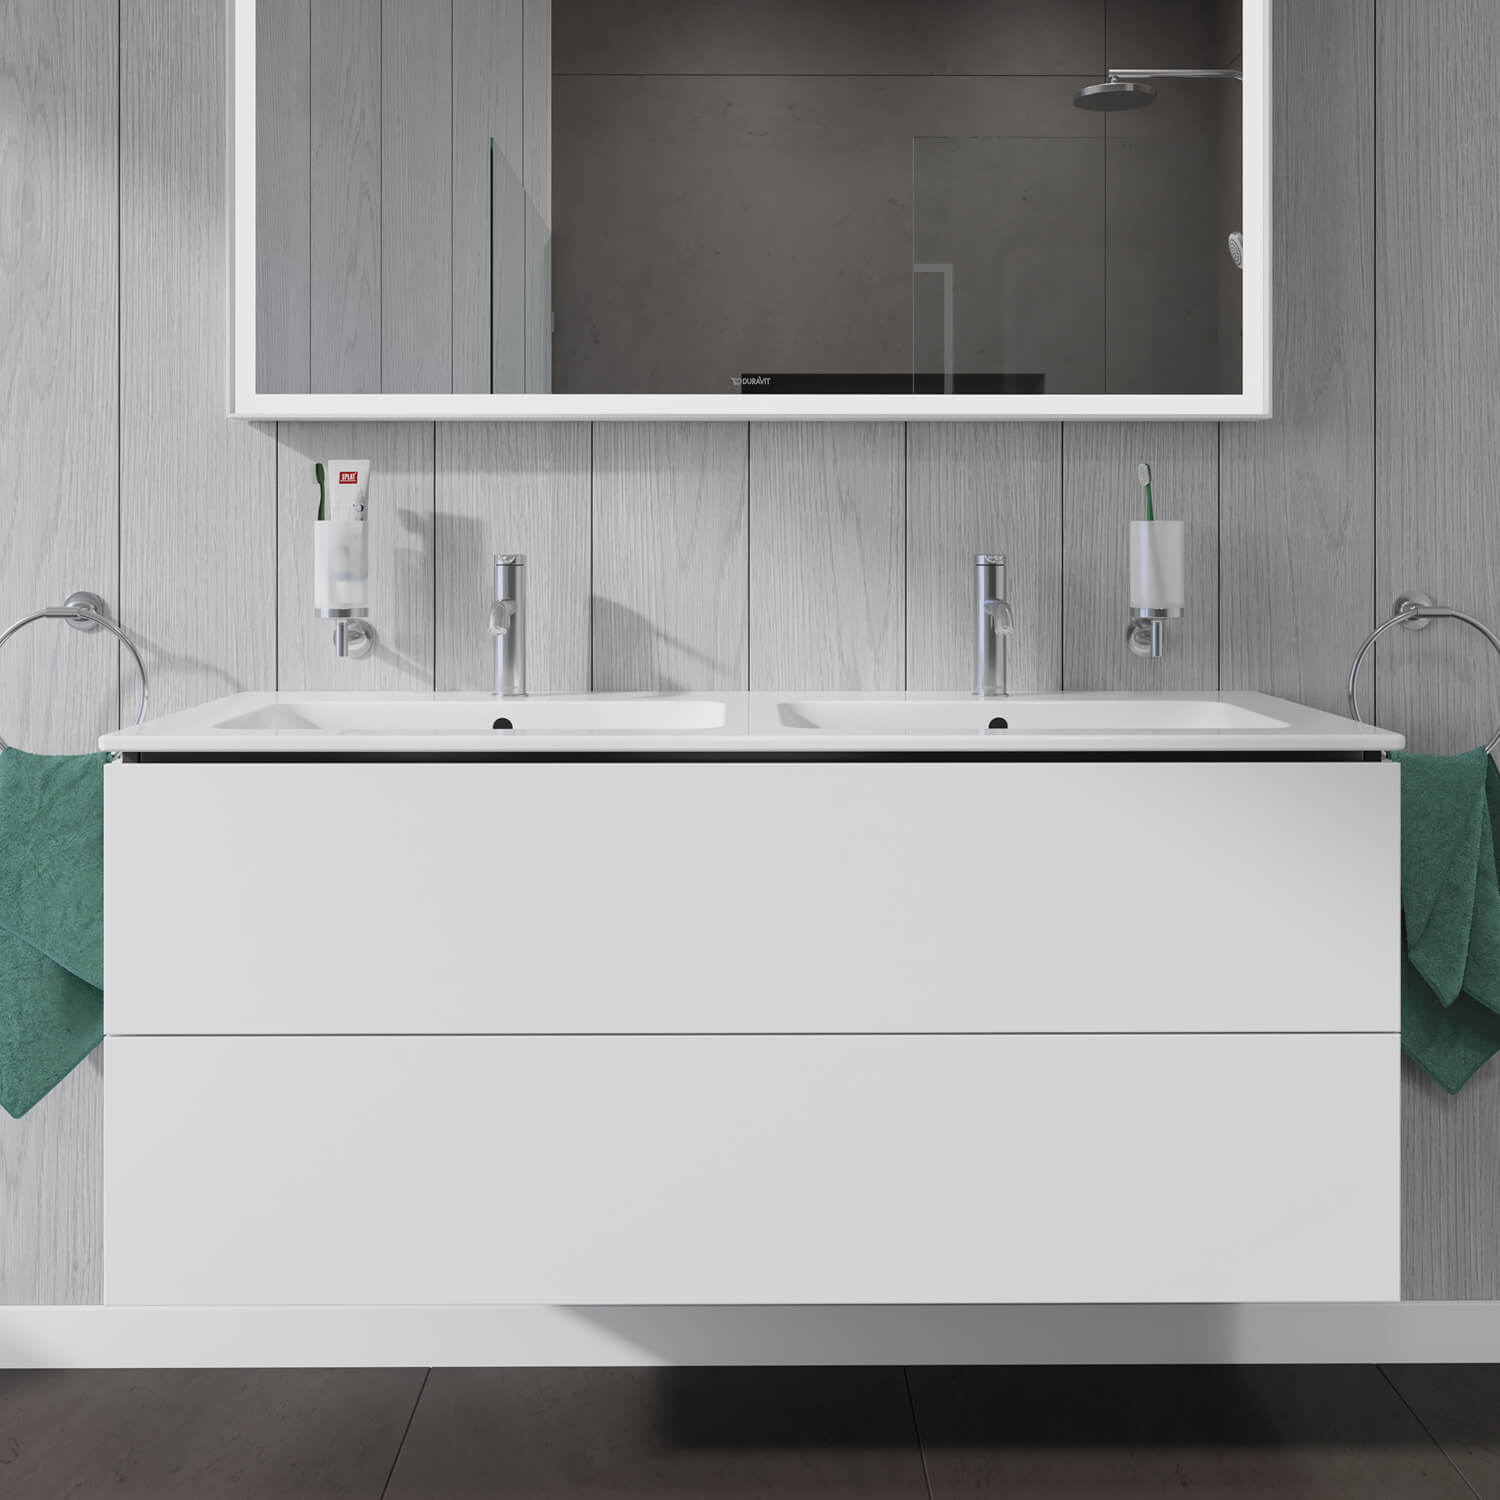 L-Cube washbasin ideal for large family bathroom
